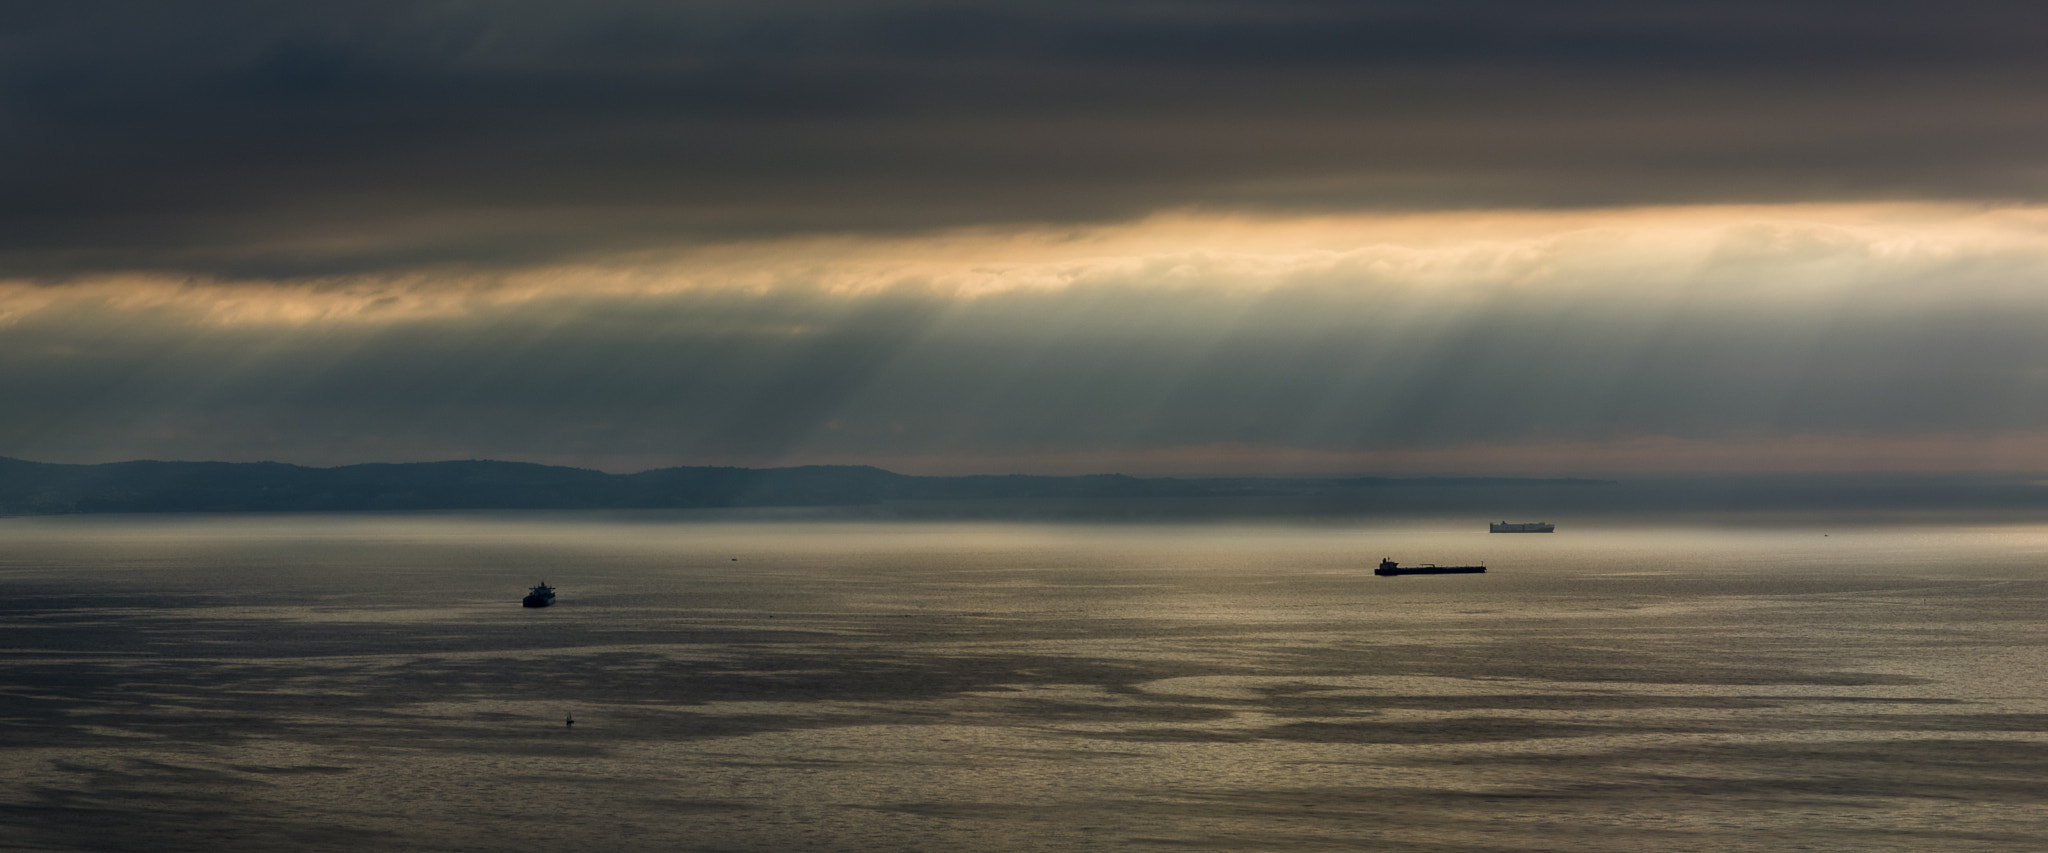 Nikon D5200 + Sigma 17-50mm F2.8 EX DC OS HSM sample photo. Ships in the dark gulf of trieste photography